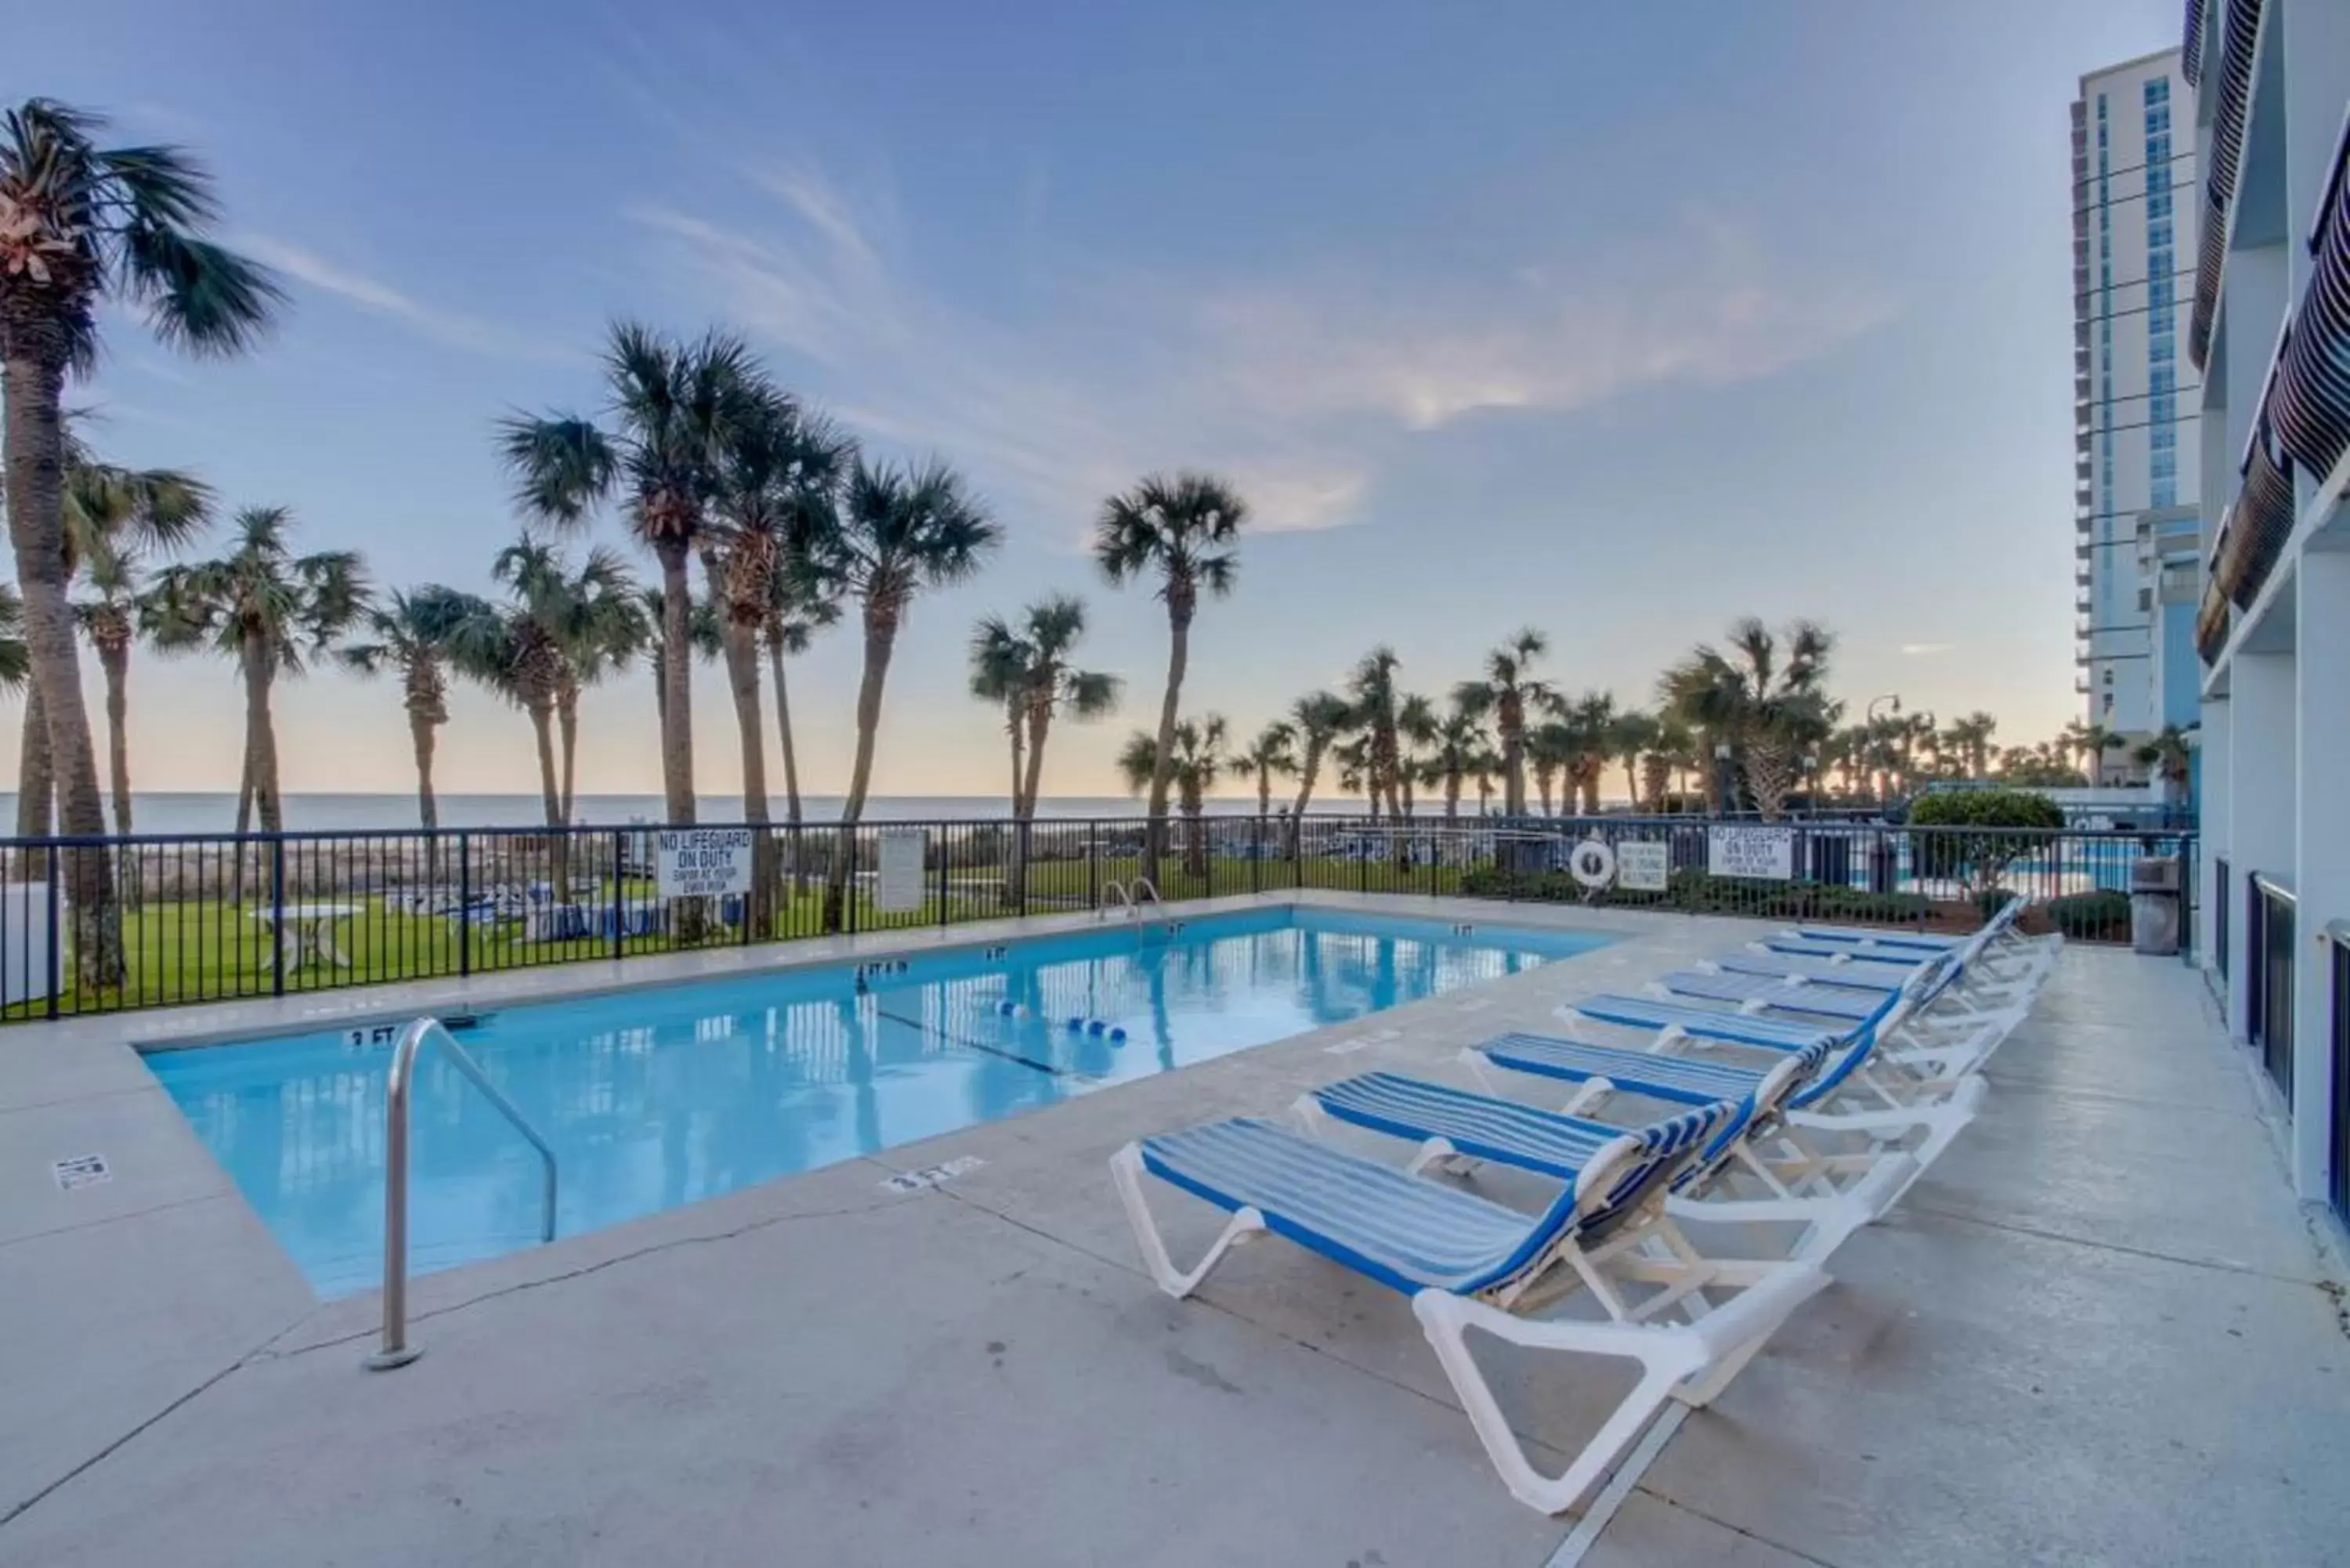 Swimming Pool in Oceanfront Paradise in the Heart of Myrtle Beach